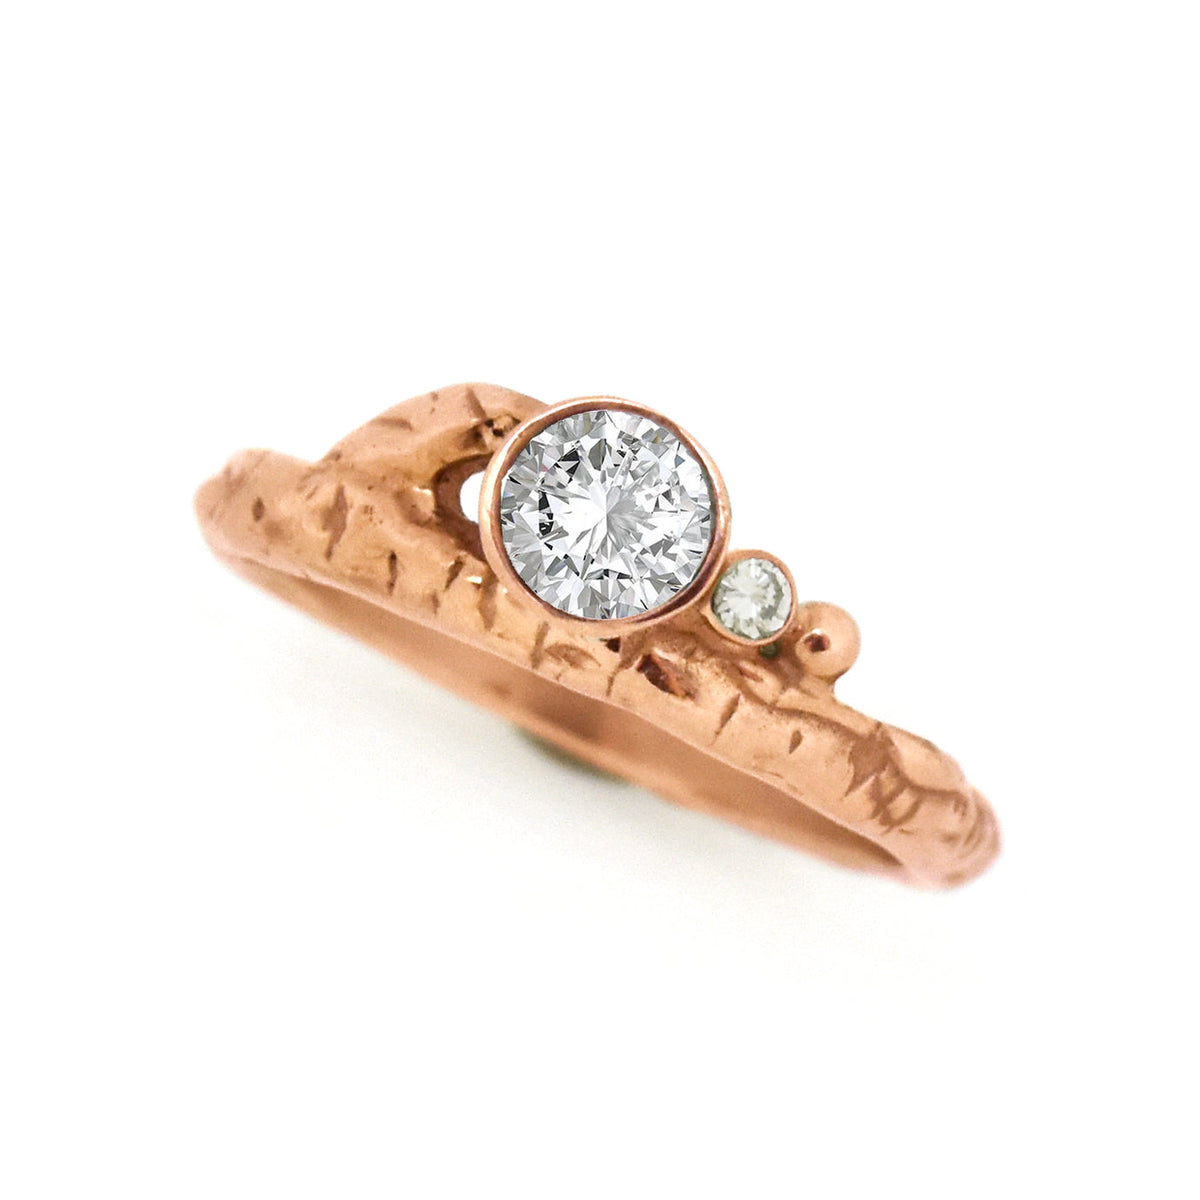 Gold Diamond Birch Twig Ring - your choice of 5mm stone & gold - Wedding Ring Recycled Diamond / 18K Palladium White Gold Recycled Diamond / 14K Rose Gold 6278 - handmade by Beth Millner Jewelry